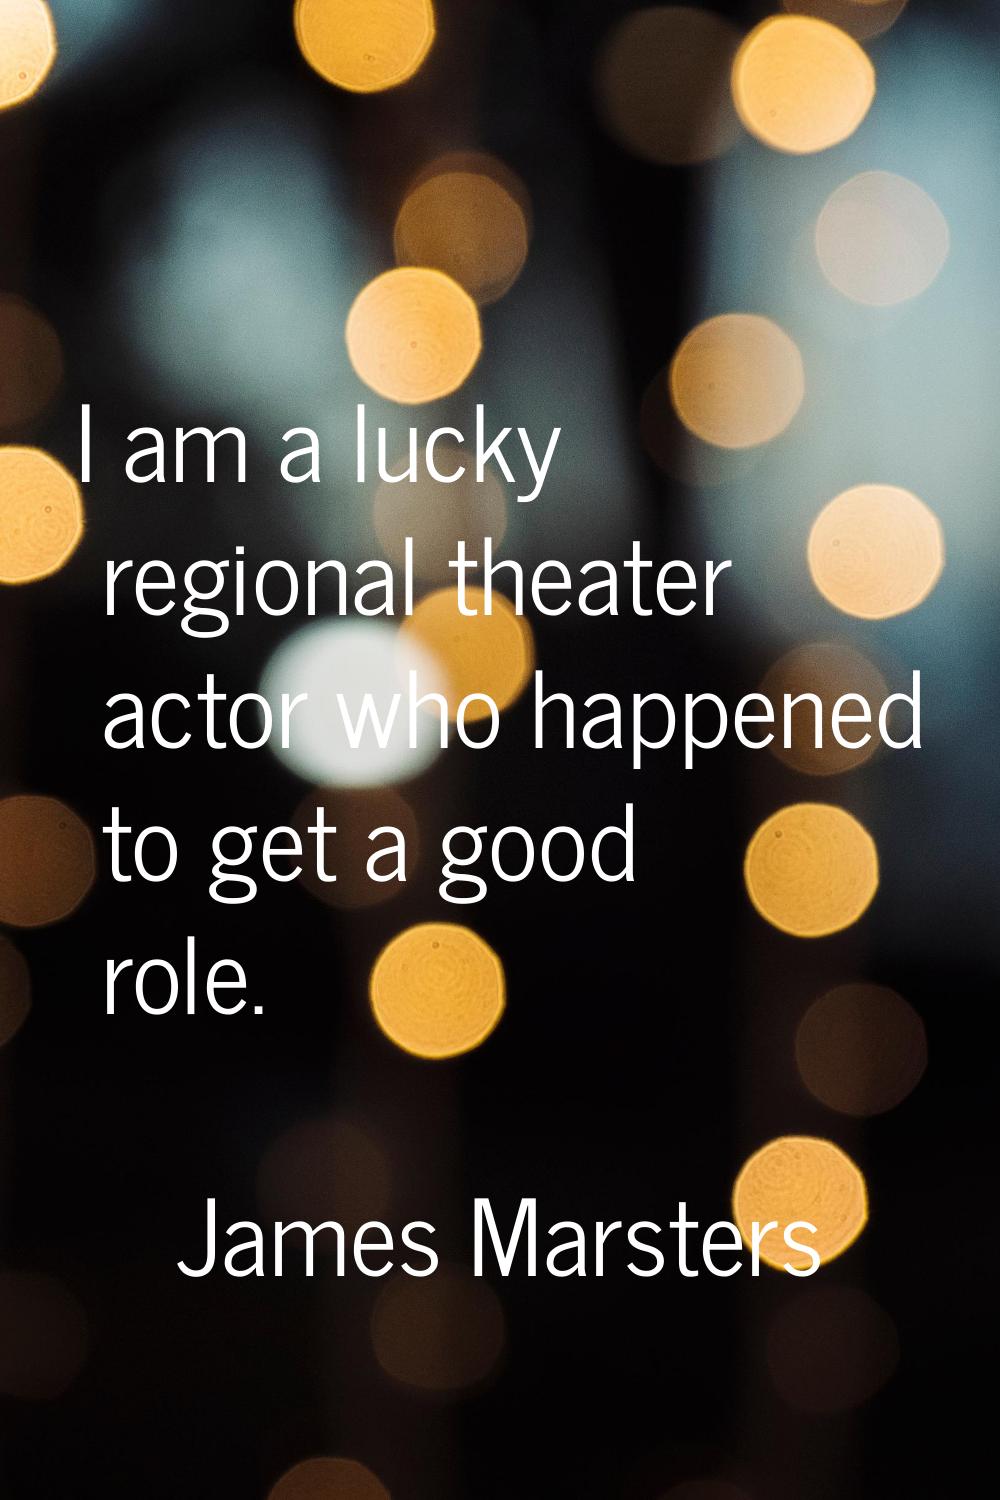 I am a lucky regional theater actor who happened to get a good role.